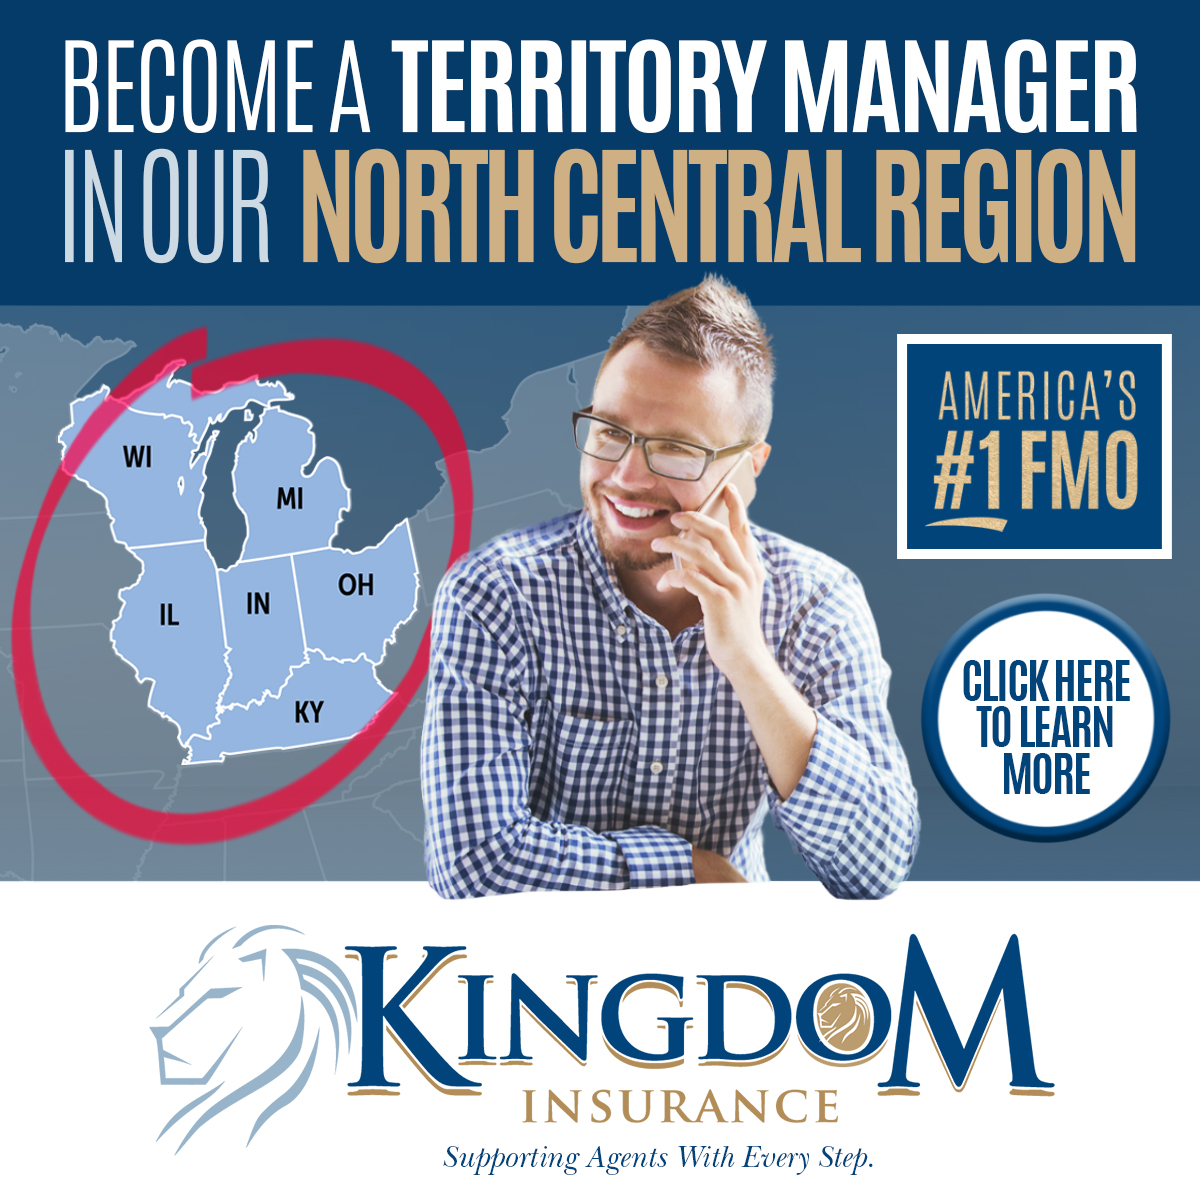 Become a Territory Manager in out North Central Region. American's #1 FMO. Click here to learn more. Kingdom Insurance. Supporting agents with every step.